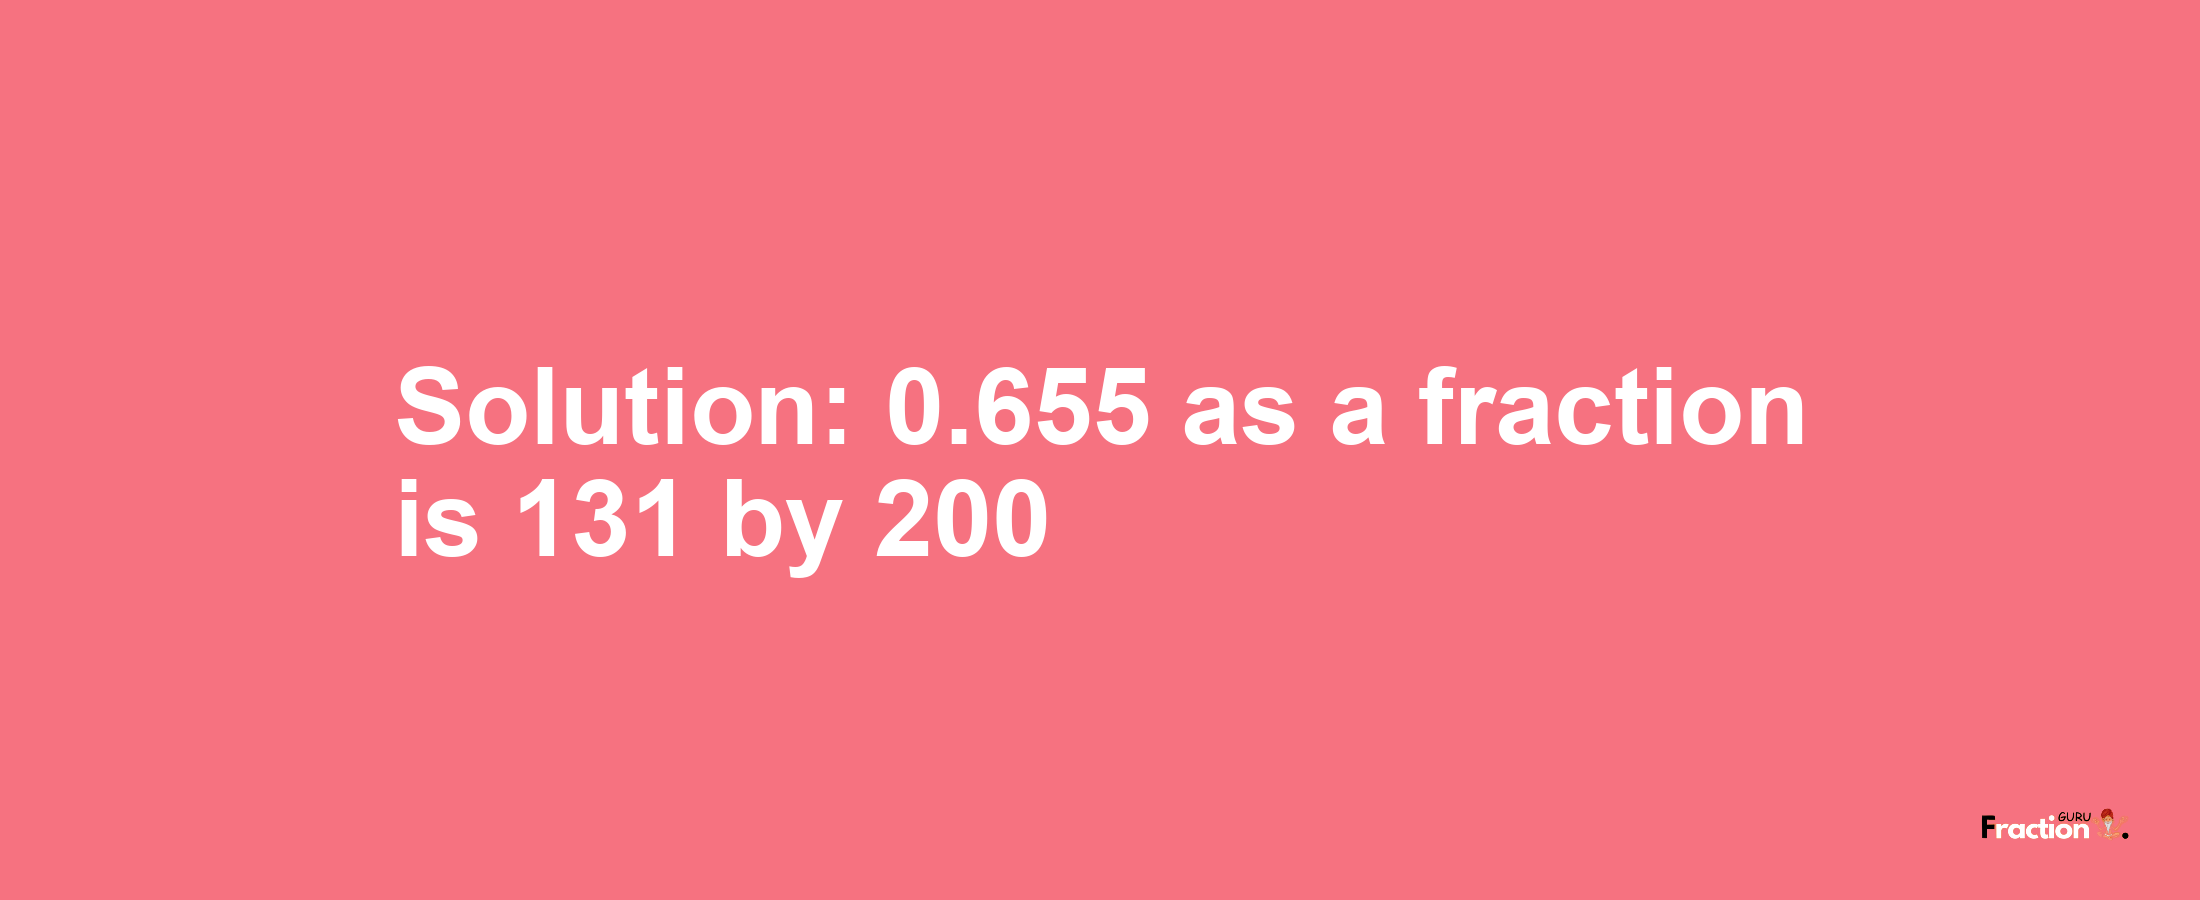 Solution:0.655 as a fraction is 131/200